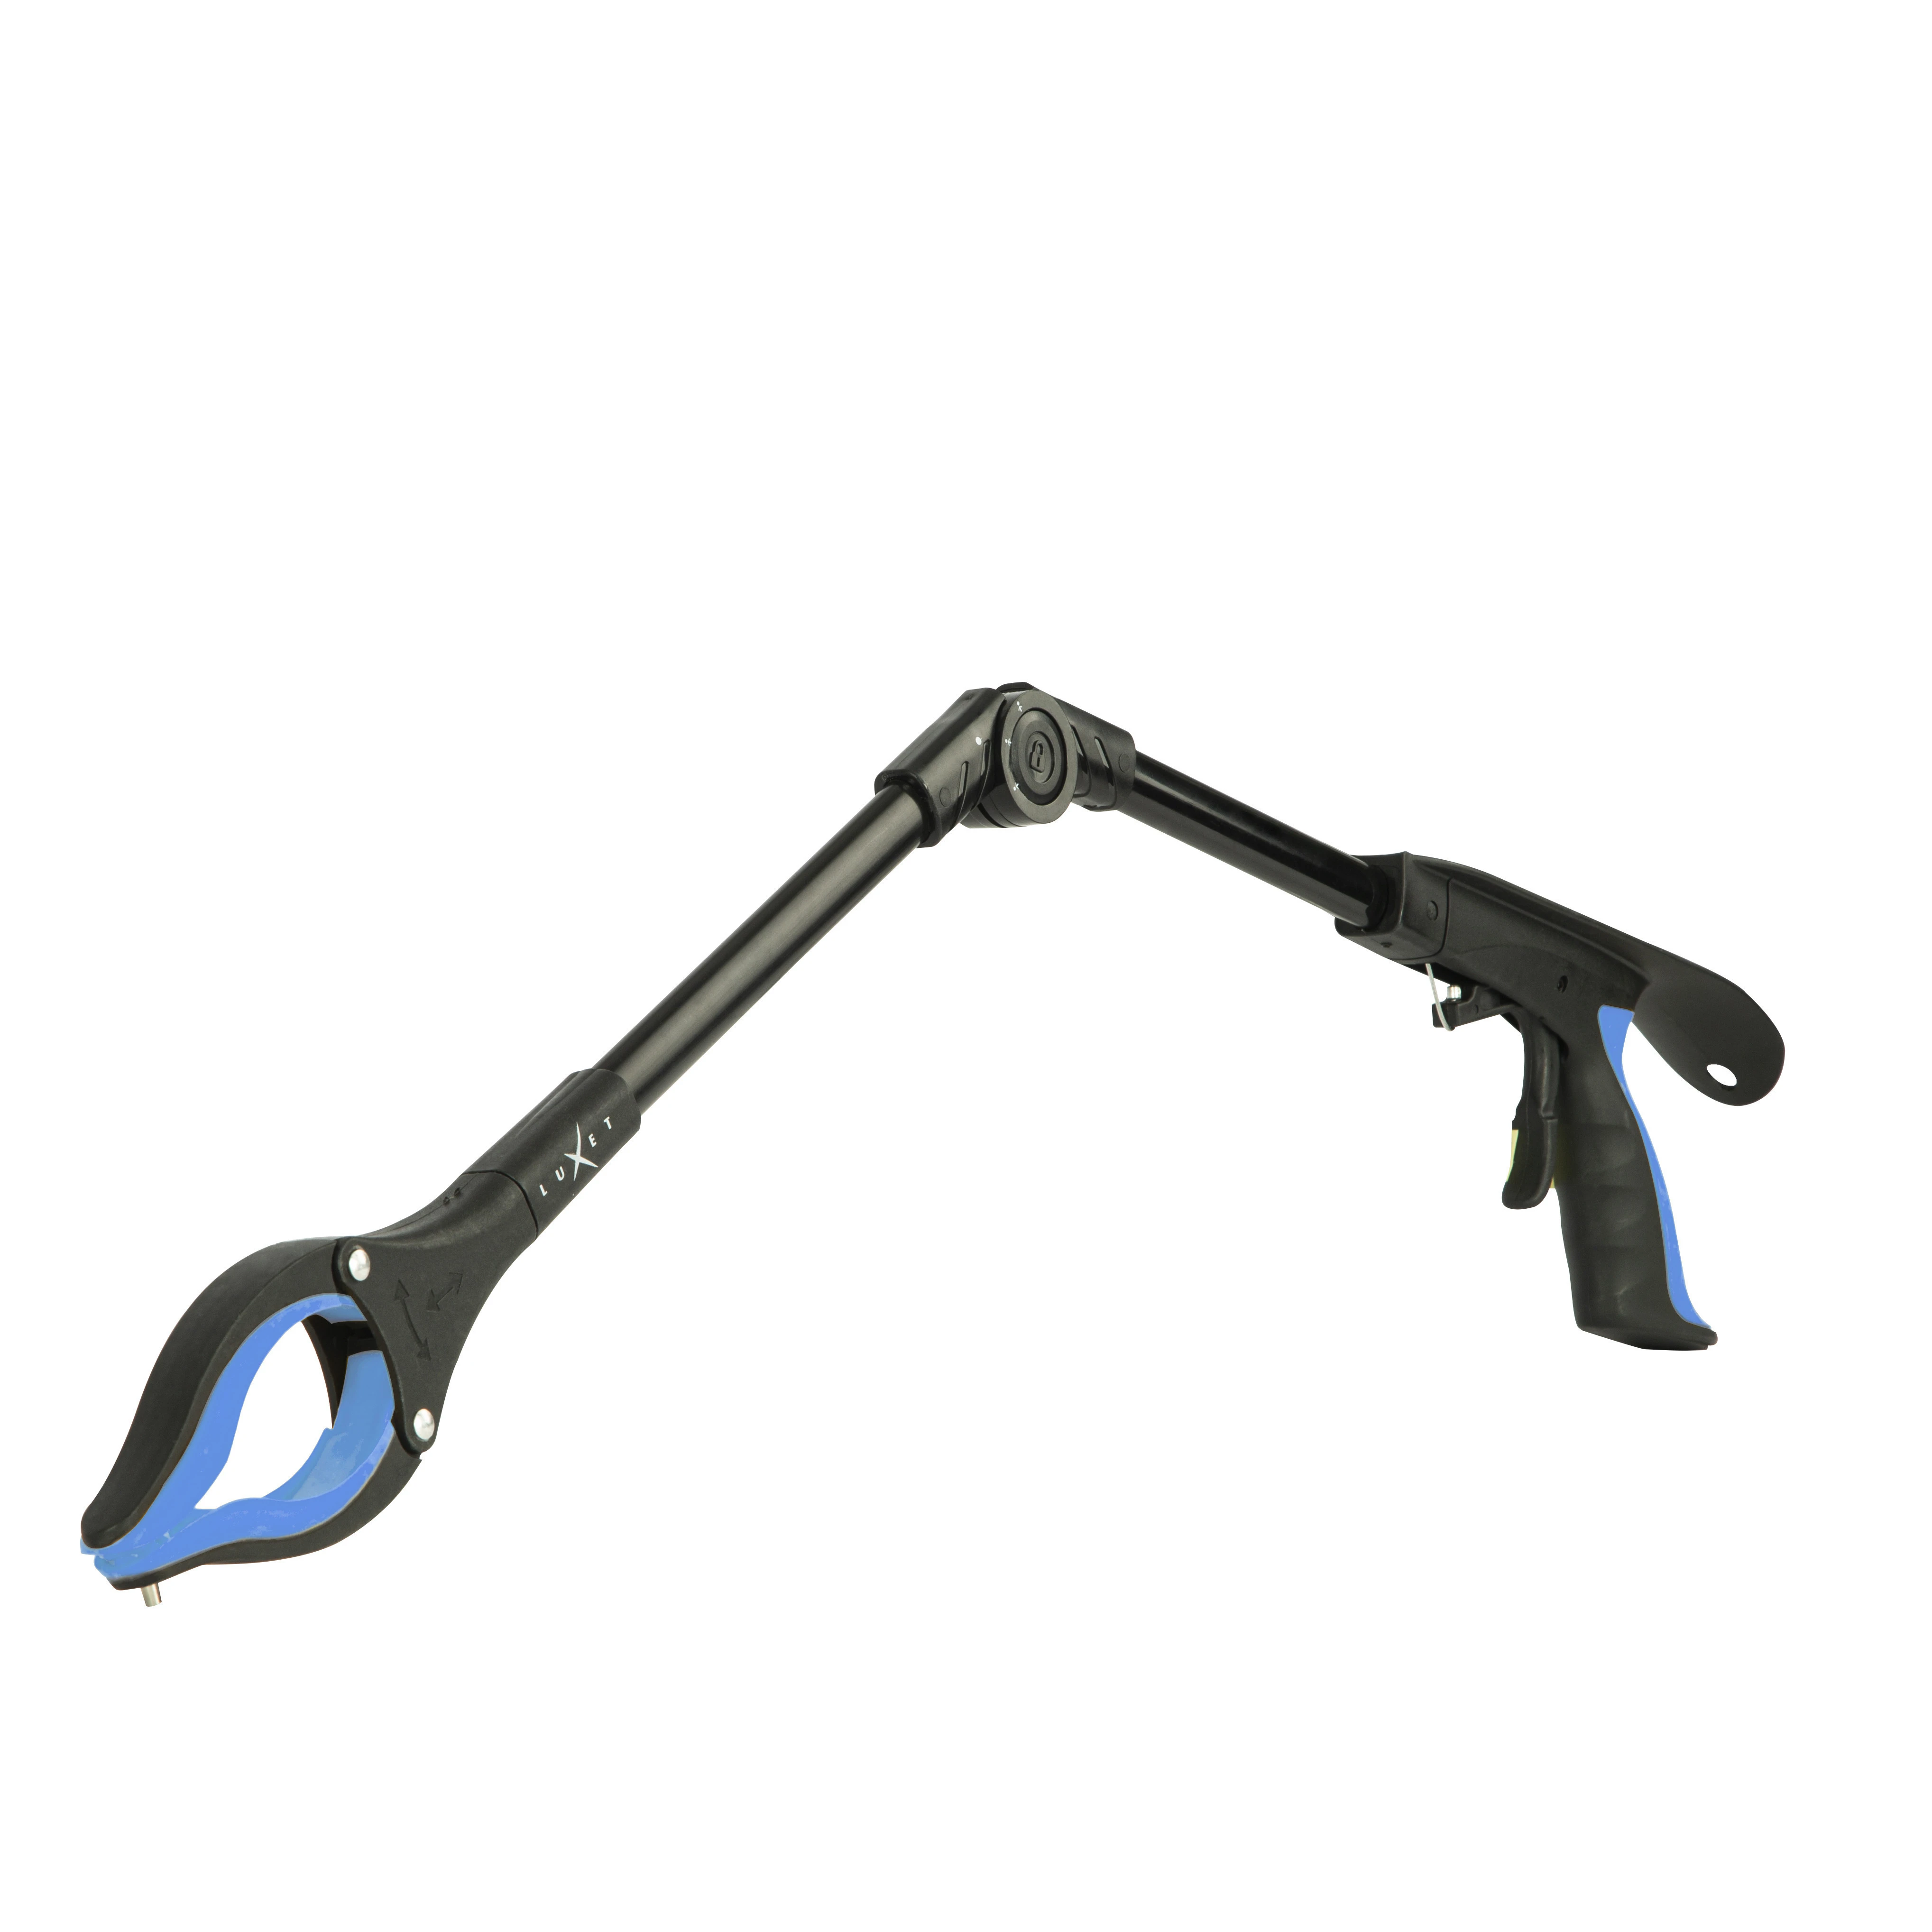 32 inch Angle Foldable Reacher WIth Shoe Horn